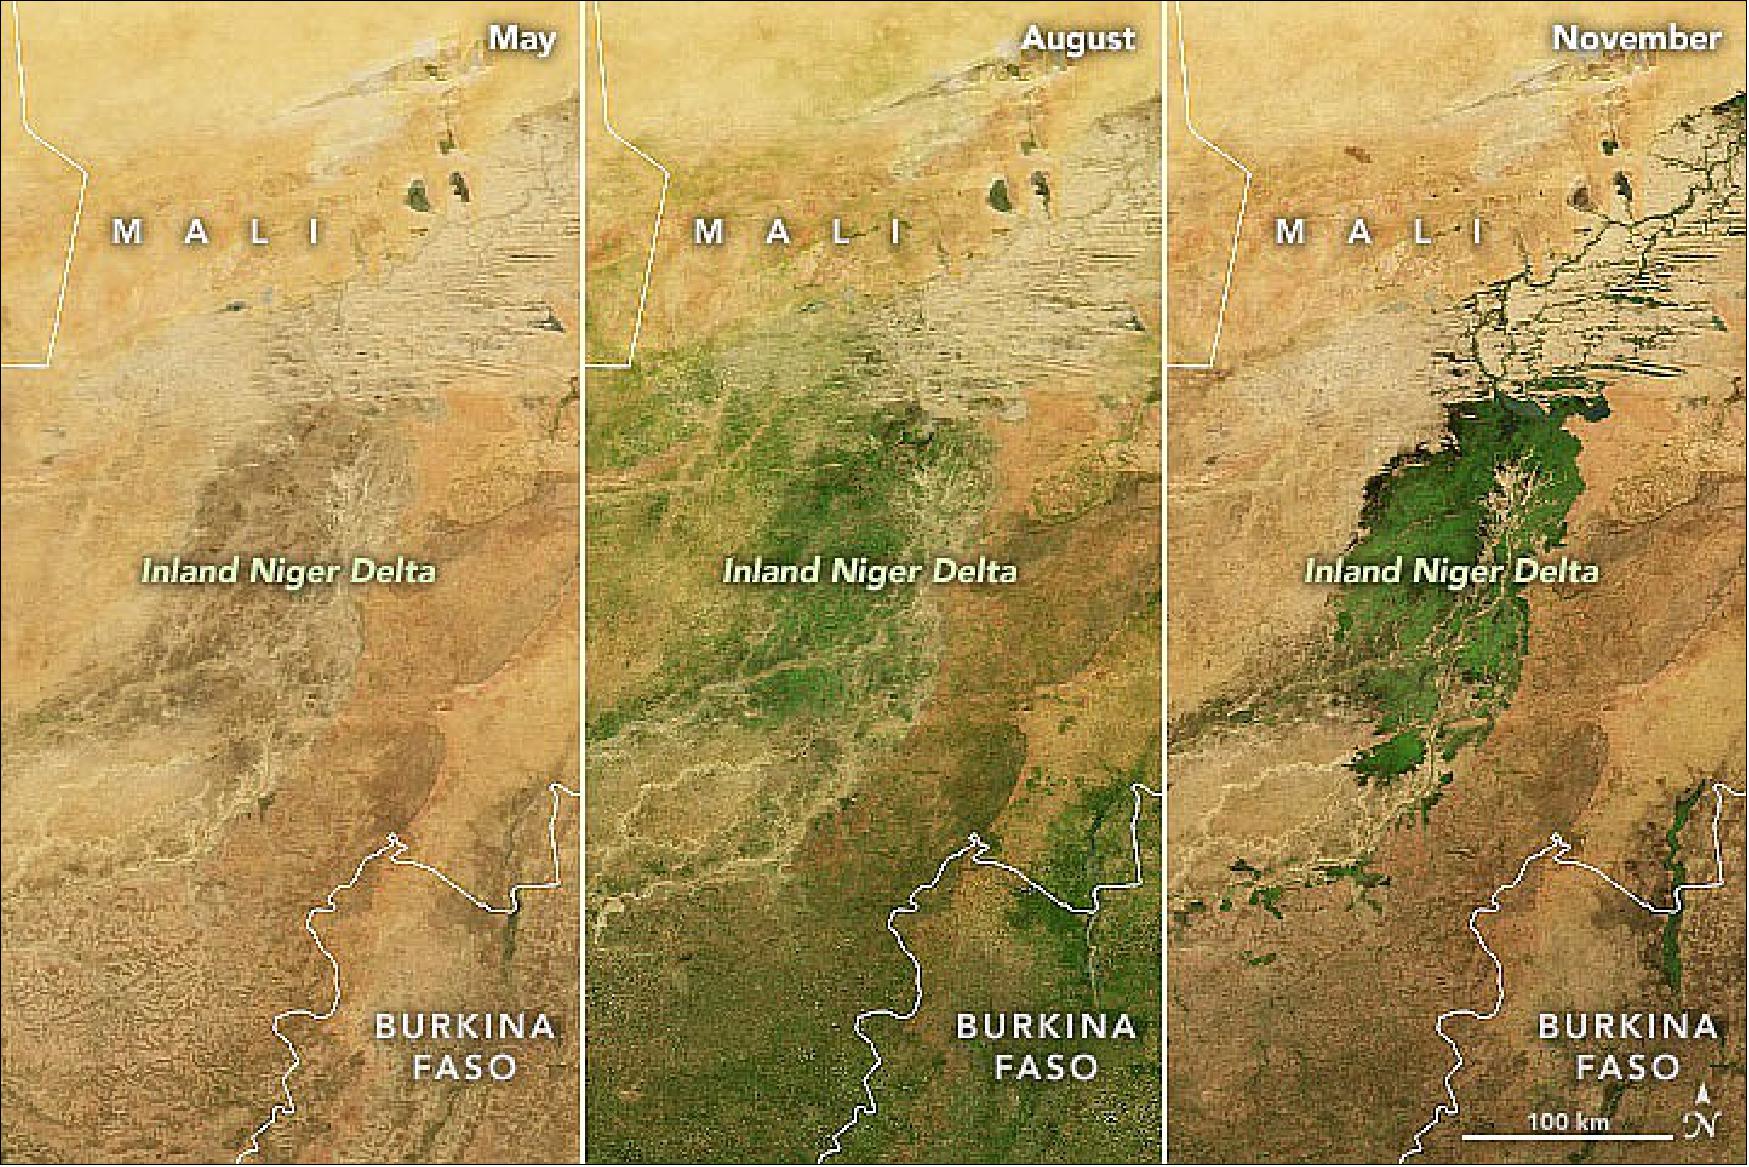 Figure 1: The Inland Delta of the Niger River is one of the world’s most productive wetlands. The progression of this greenup is shown in the natural-color images from May, August, and November 2021. Each image is a monthly composite view built from data acquired by the MODIS instrument on NASA’s Aqua satellite. The composite approach allows a cloud-free view in a region that can often be cloudy (image credit: NASA Earth Observatory images by Joshua Stevens, using data from the Level-1 and Atmosphere Archive & Distribution System (LAADS) and Land Atmosphere Near real-time Capability for EOS (LANCE), Landsat data from the U.S. Geological Survey. Story by Michael Carlowicz)